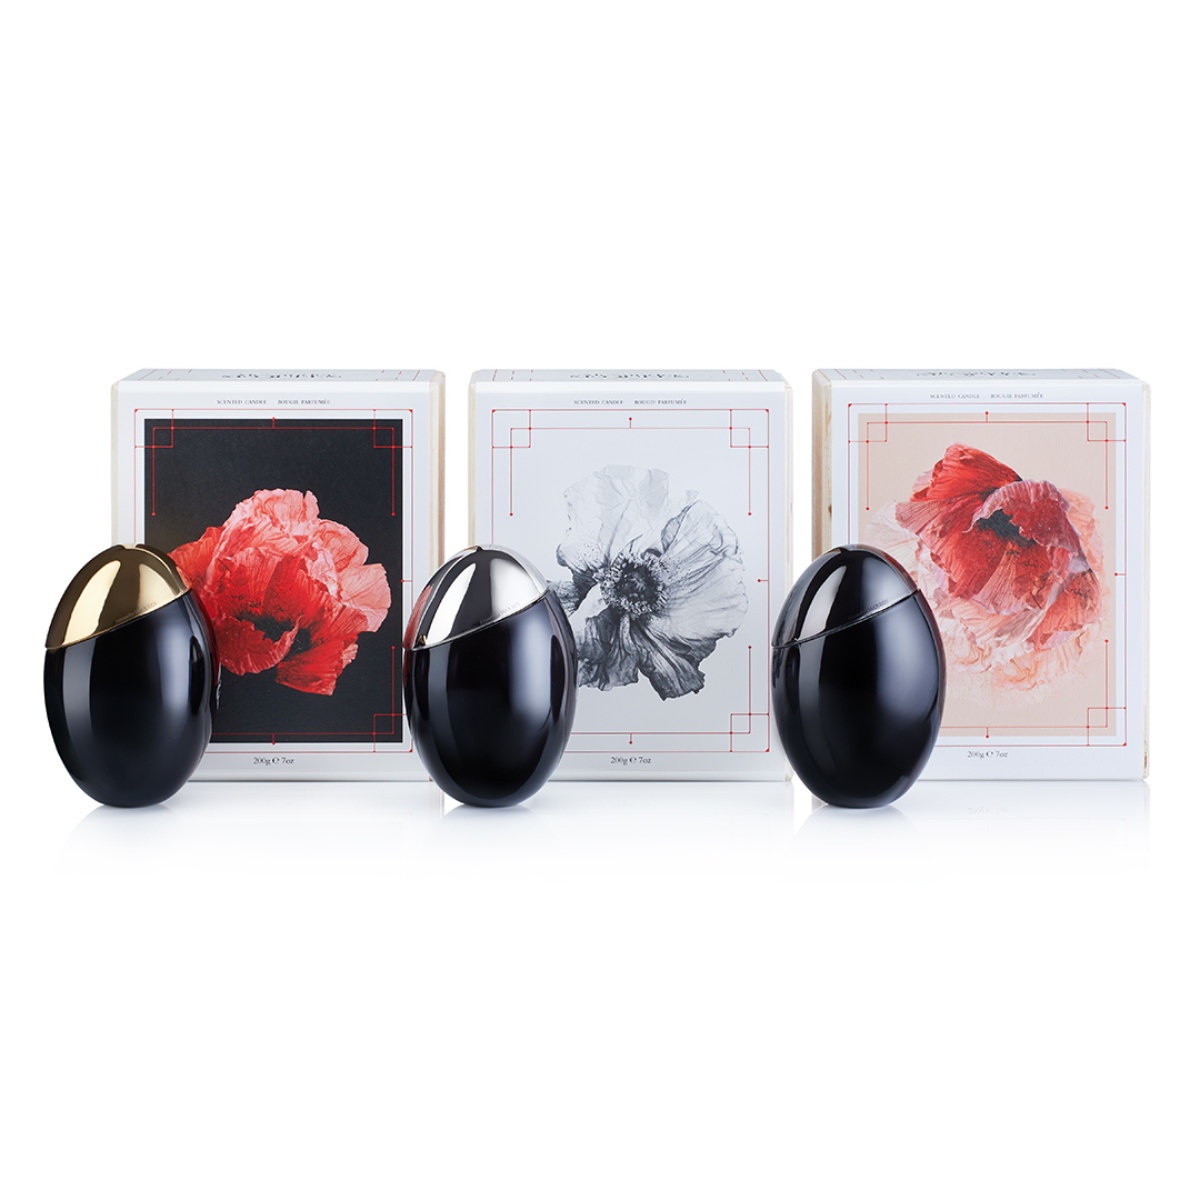 Alexander McQueen Launches Its New Candle Collection